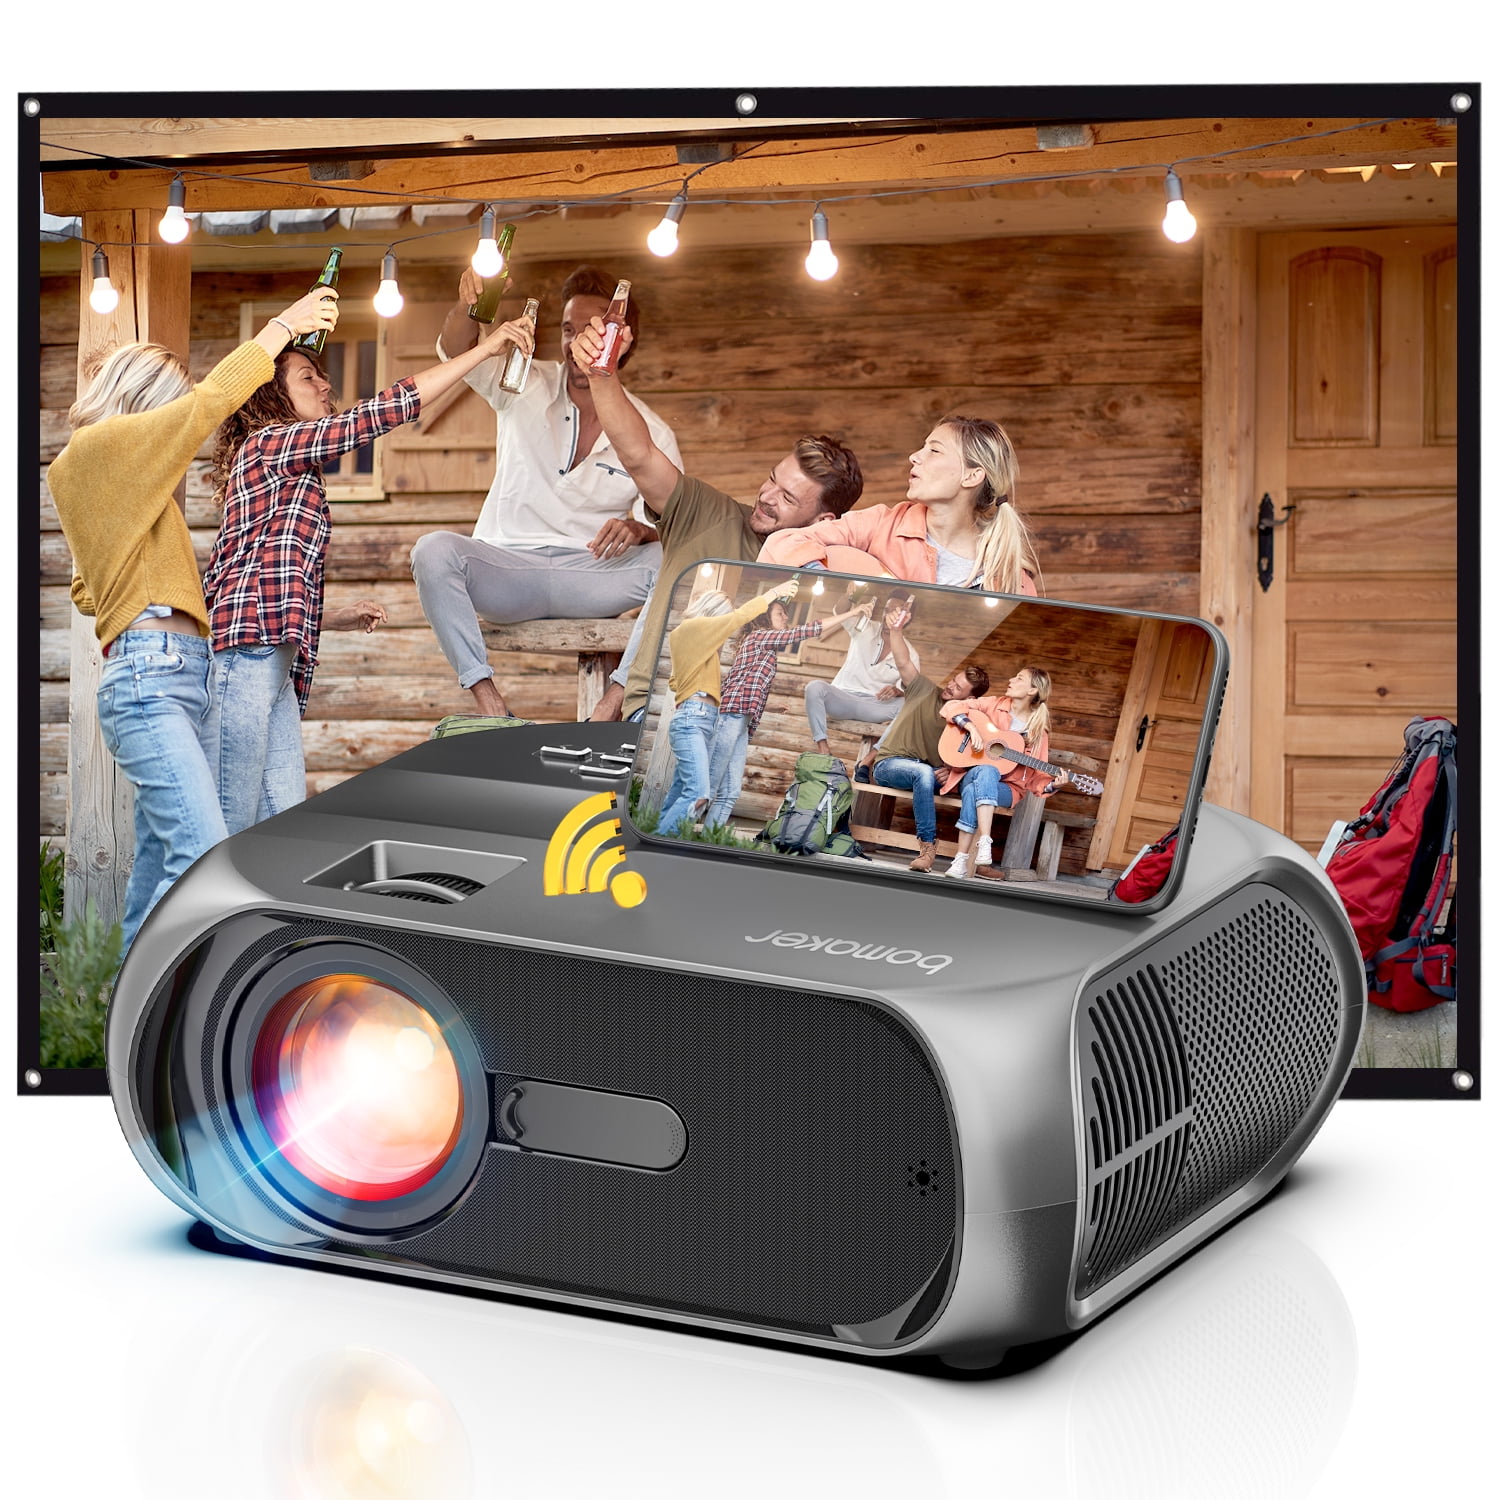 Bomaker 2021 Upgraded HD 1080P Projector 100 Outdoor Projector Screen Included Portable Outdoor Movie Projector Compatible with Phone Video Games Movies Outdoor Home Theater Bluetooth Projector TV Stick H Mini Portable Wireless WiFi Projector PS4 